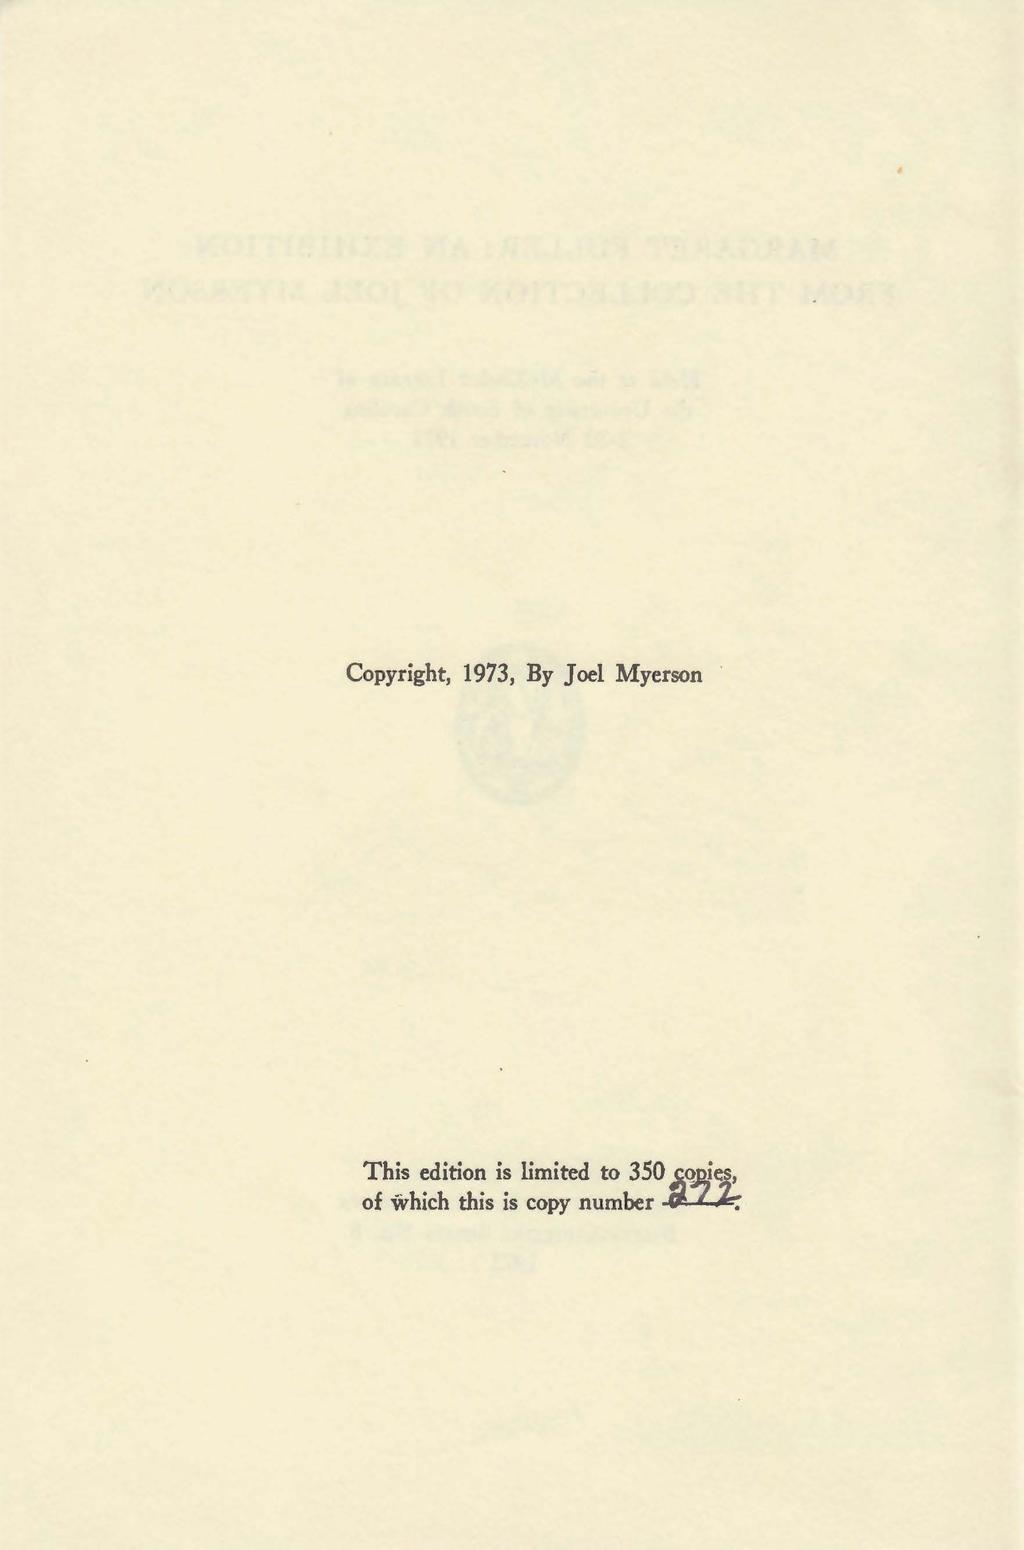 Copyright, 1973, By Joel Myerson This edition is